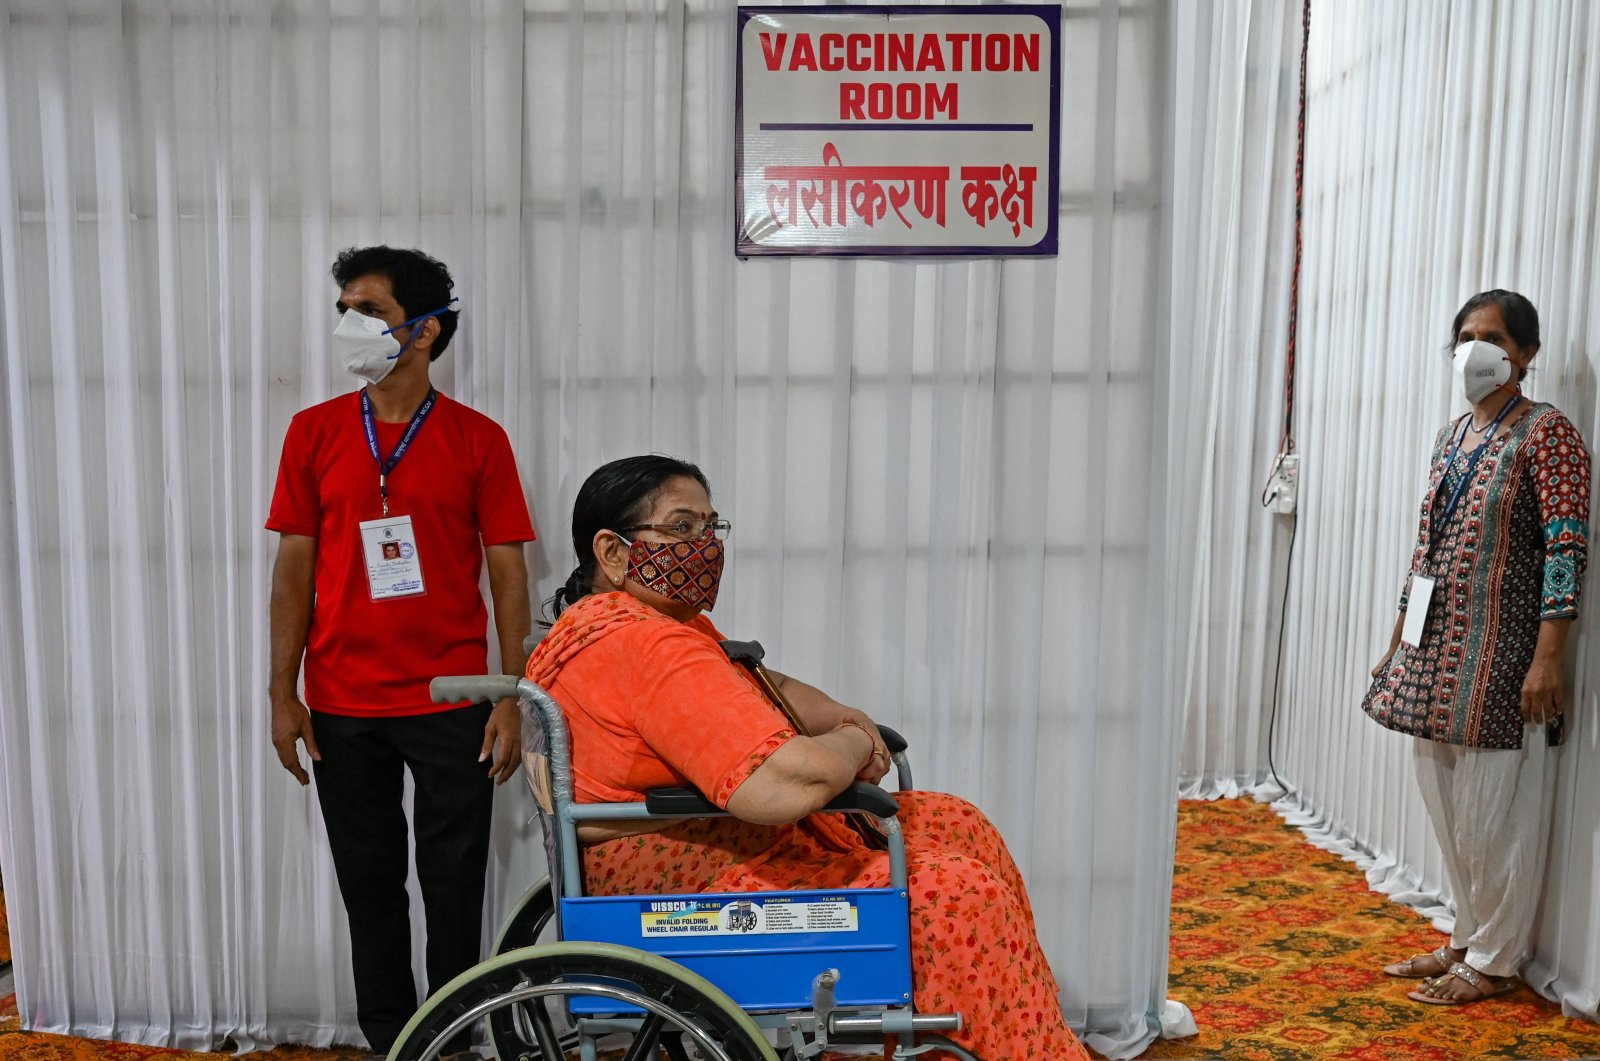 An elderly woman waits to get inoculated with a COVID-19 vaccine, at a vaccination center in Mumbai, India, May 12, 2021. (AFP Photo)